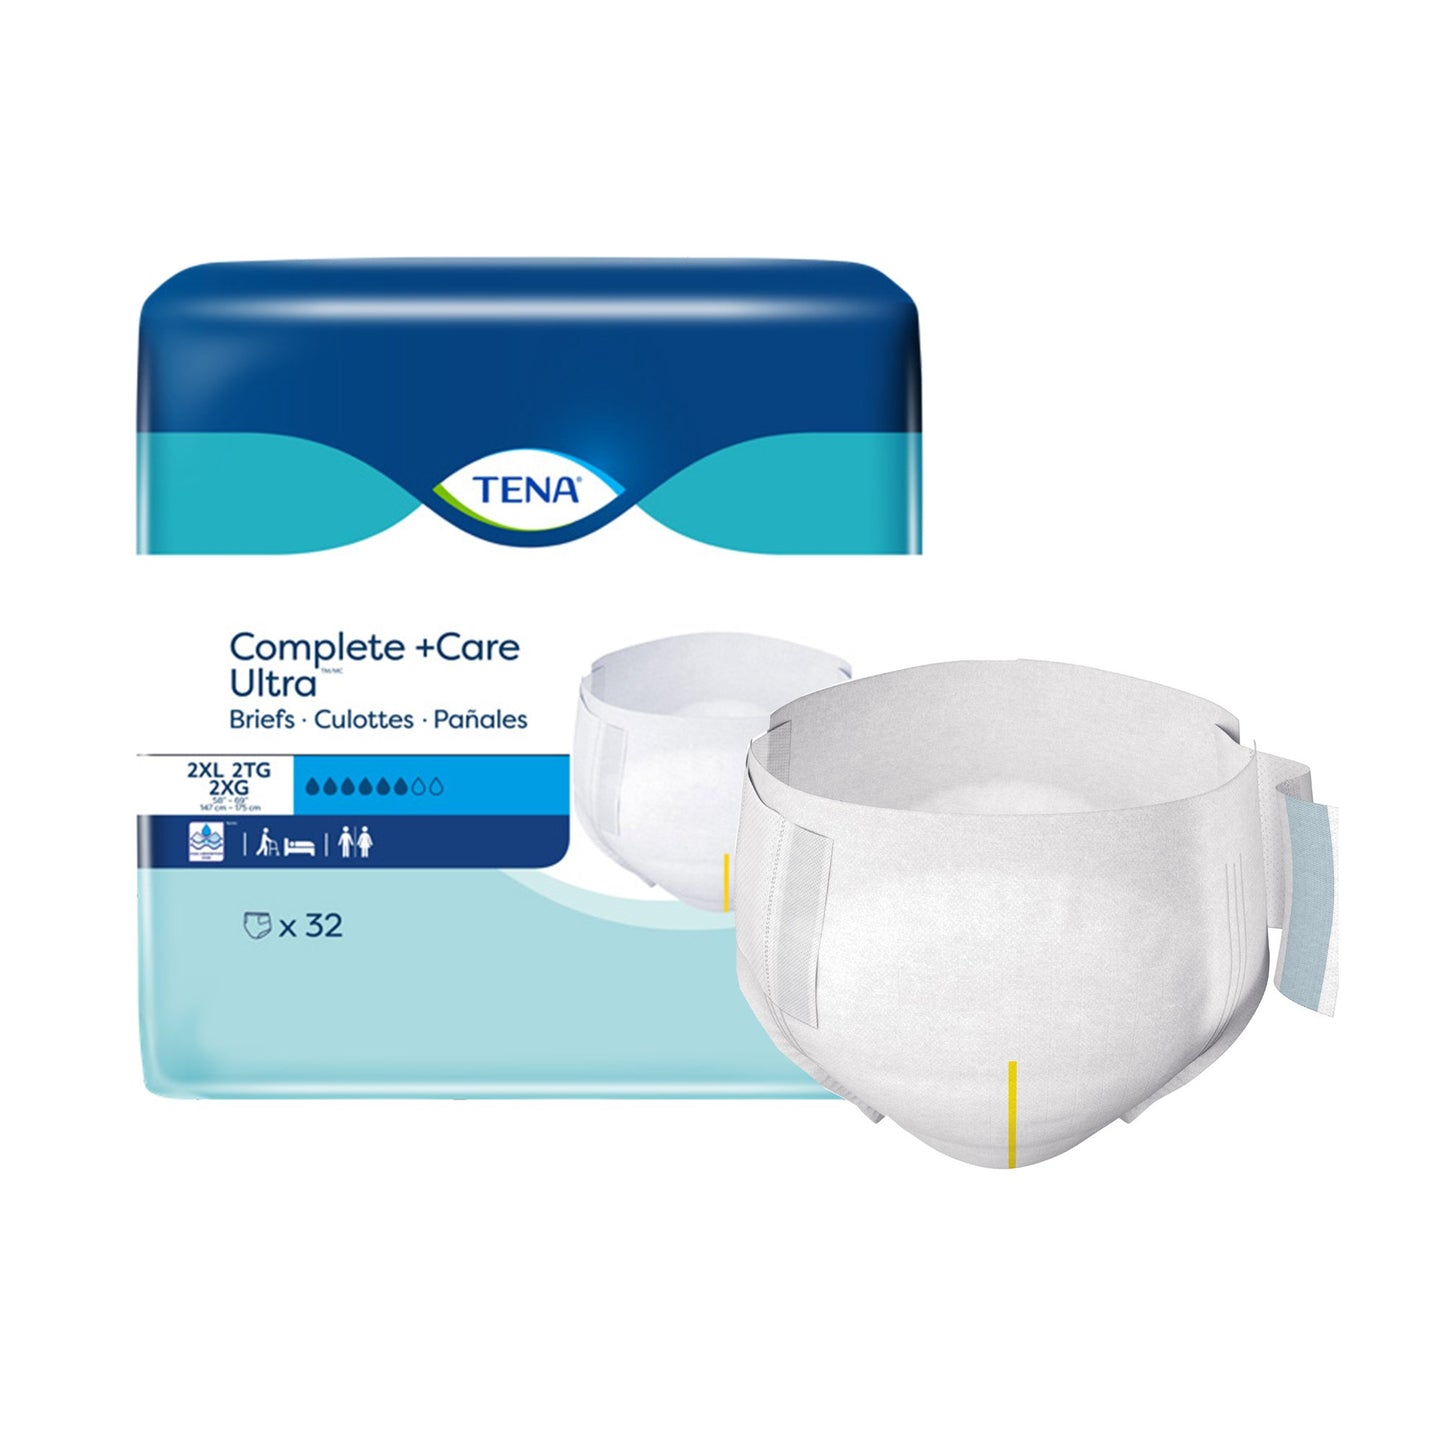 TENA Complete +Care Ultra™ Incontinence Brief, 2X-Large, 32 ct